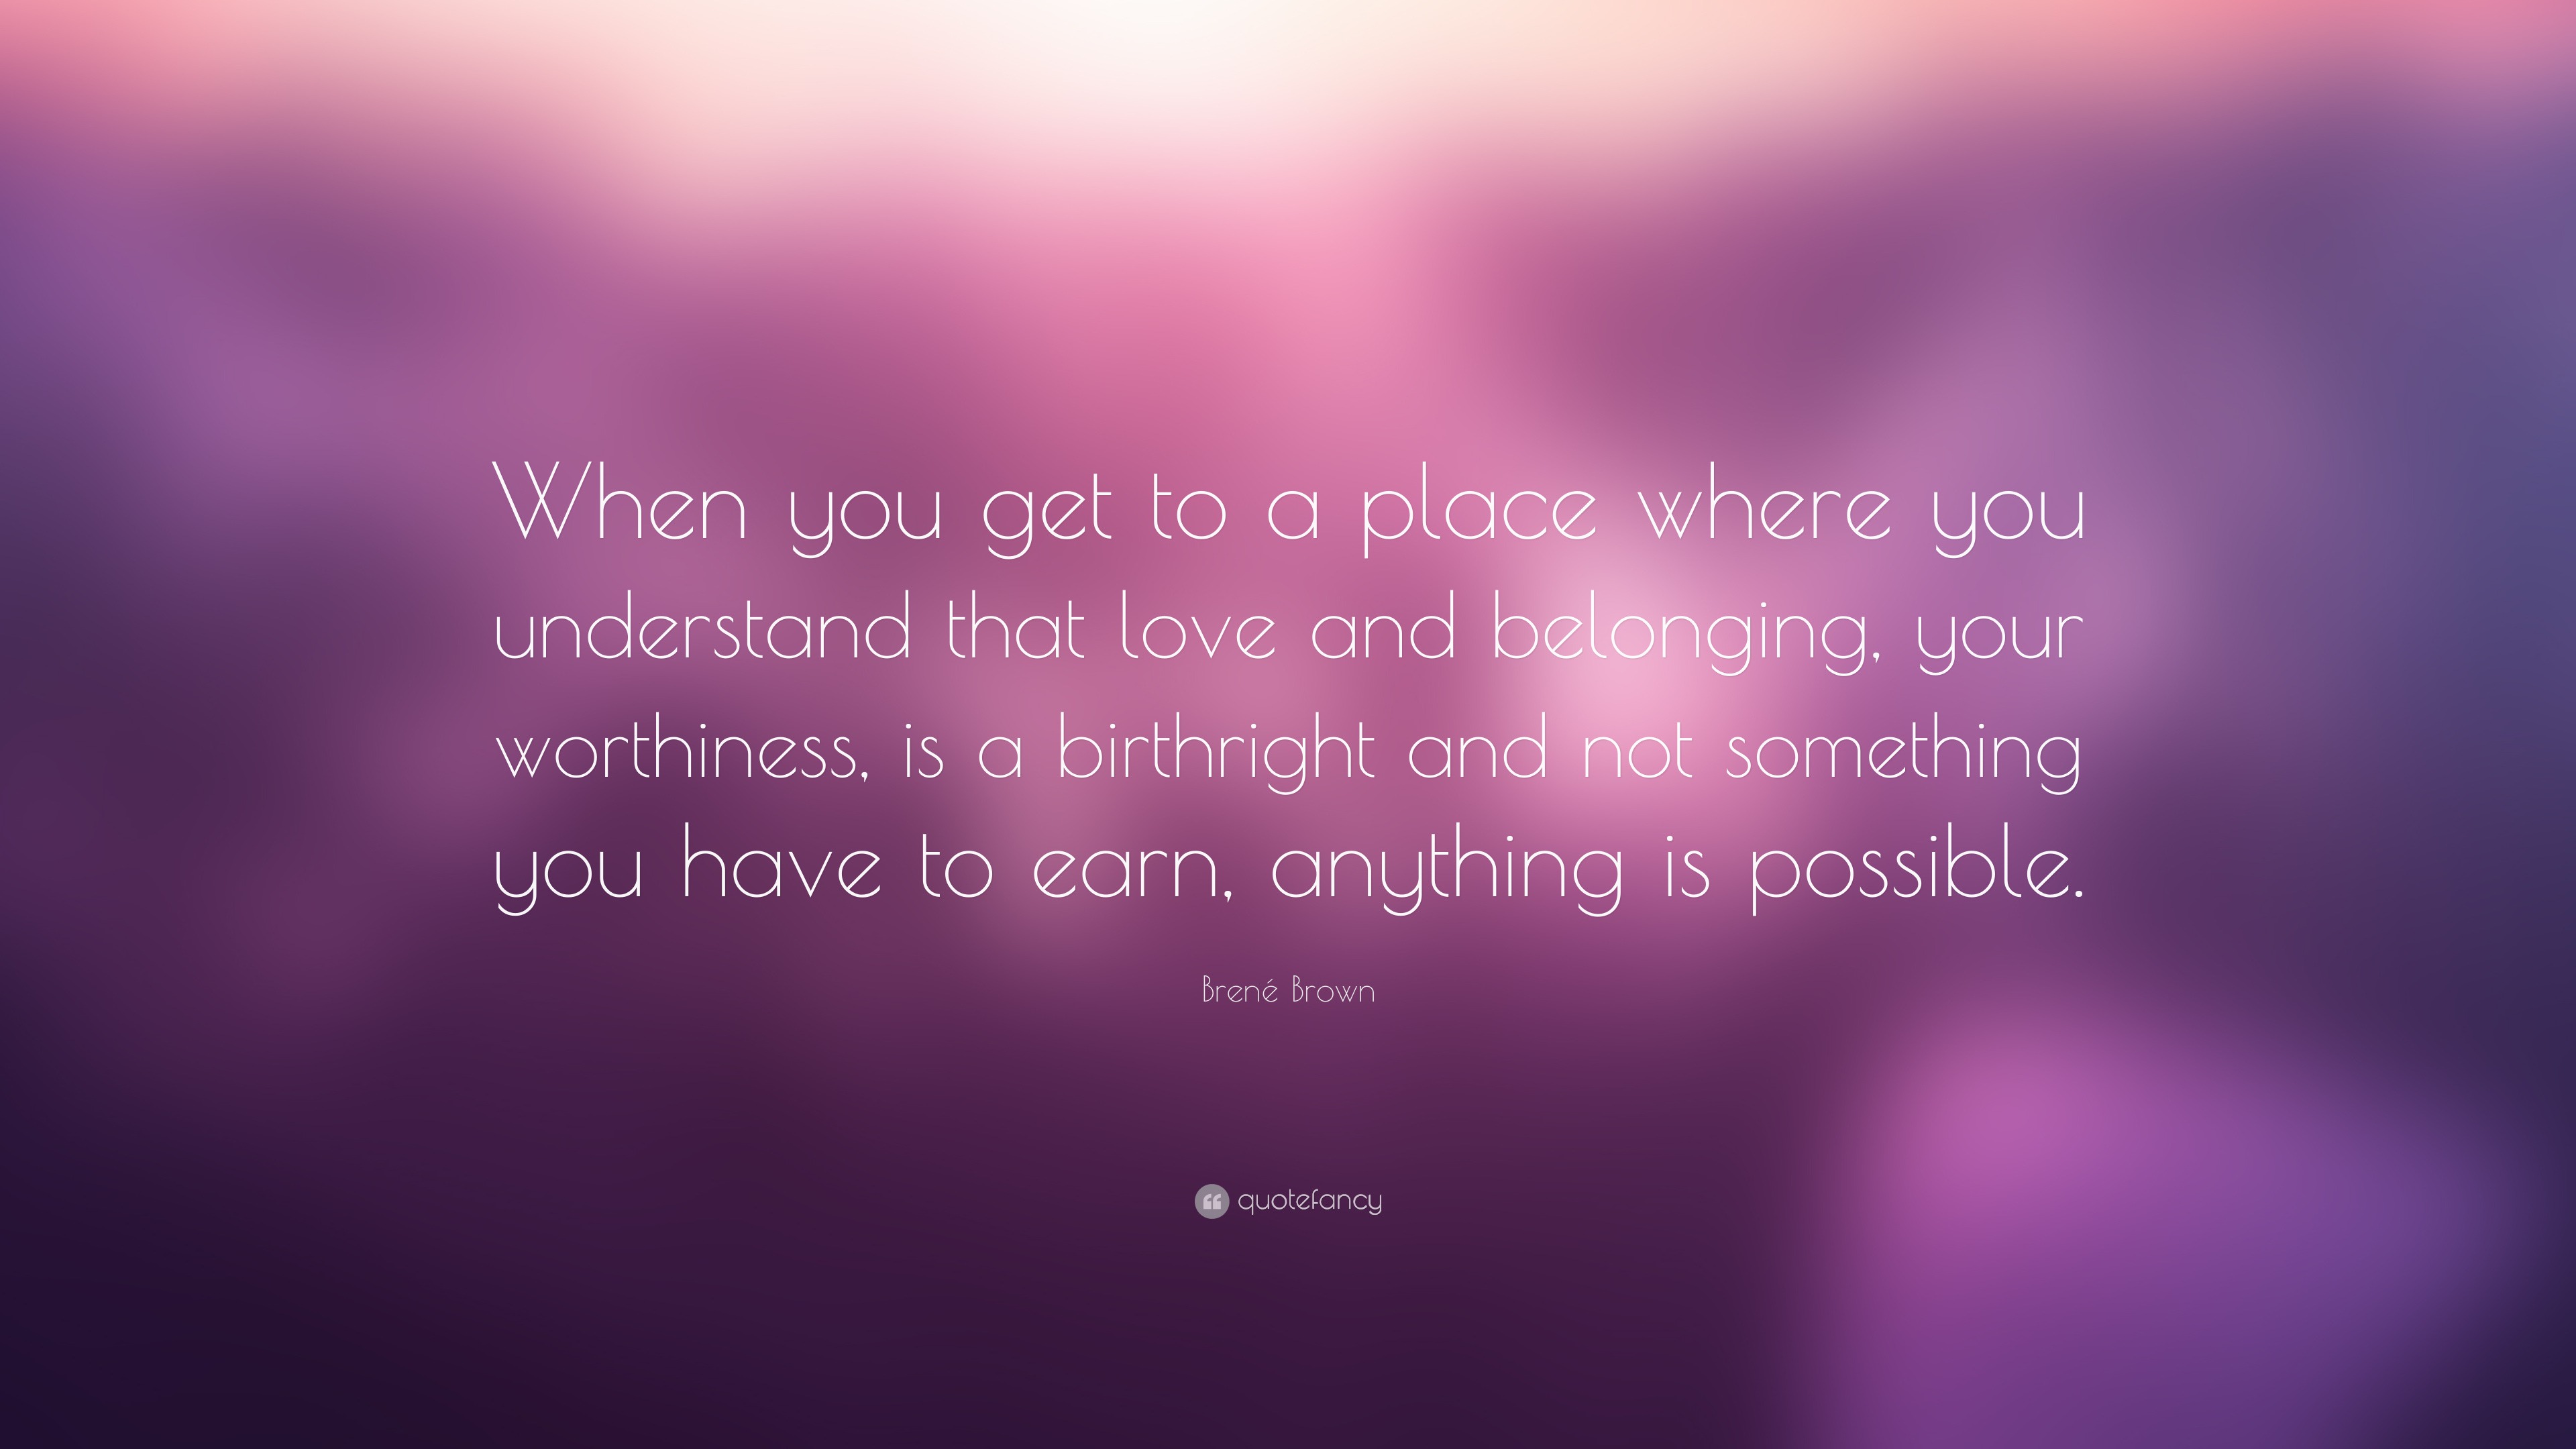 Brené Brown Quote: “When you get to a place where you understand that ...